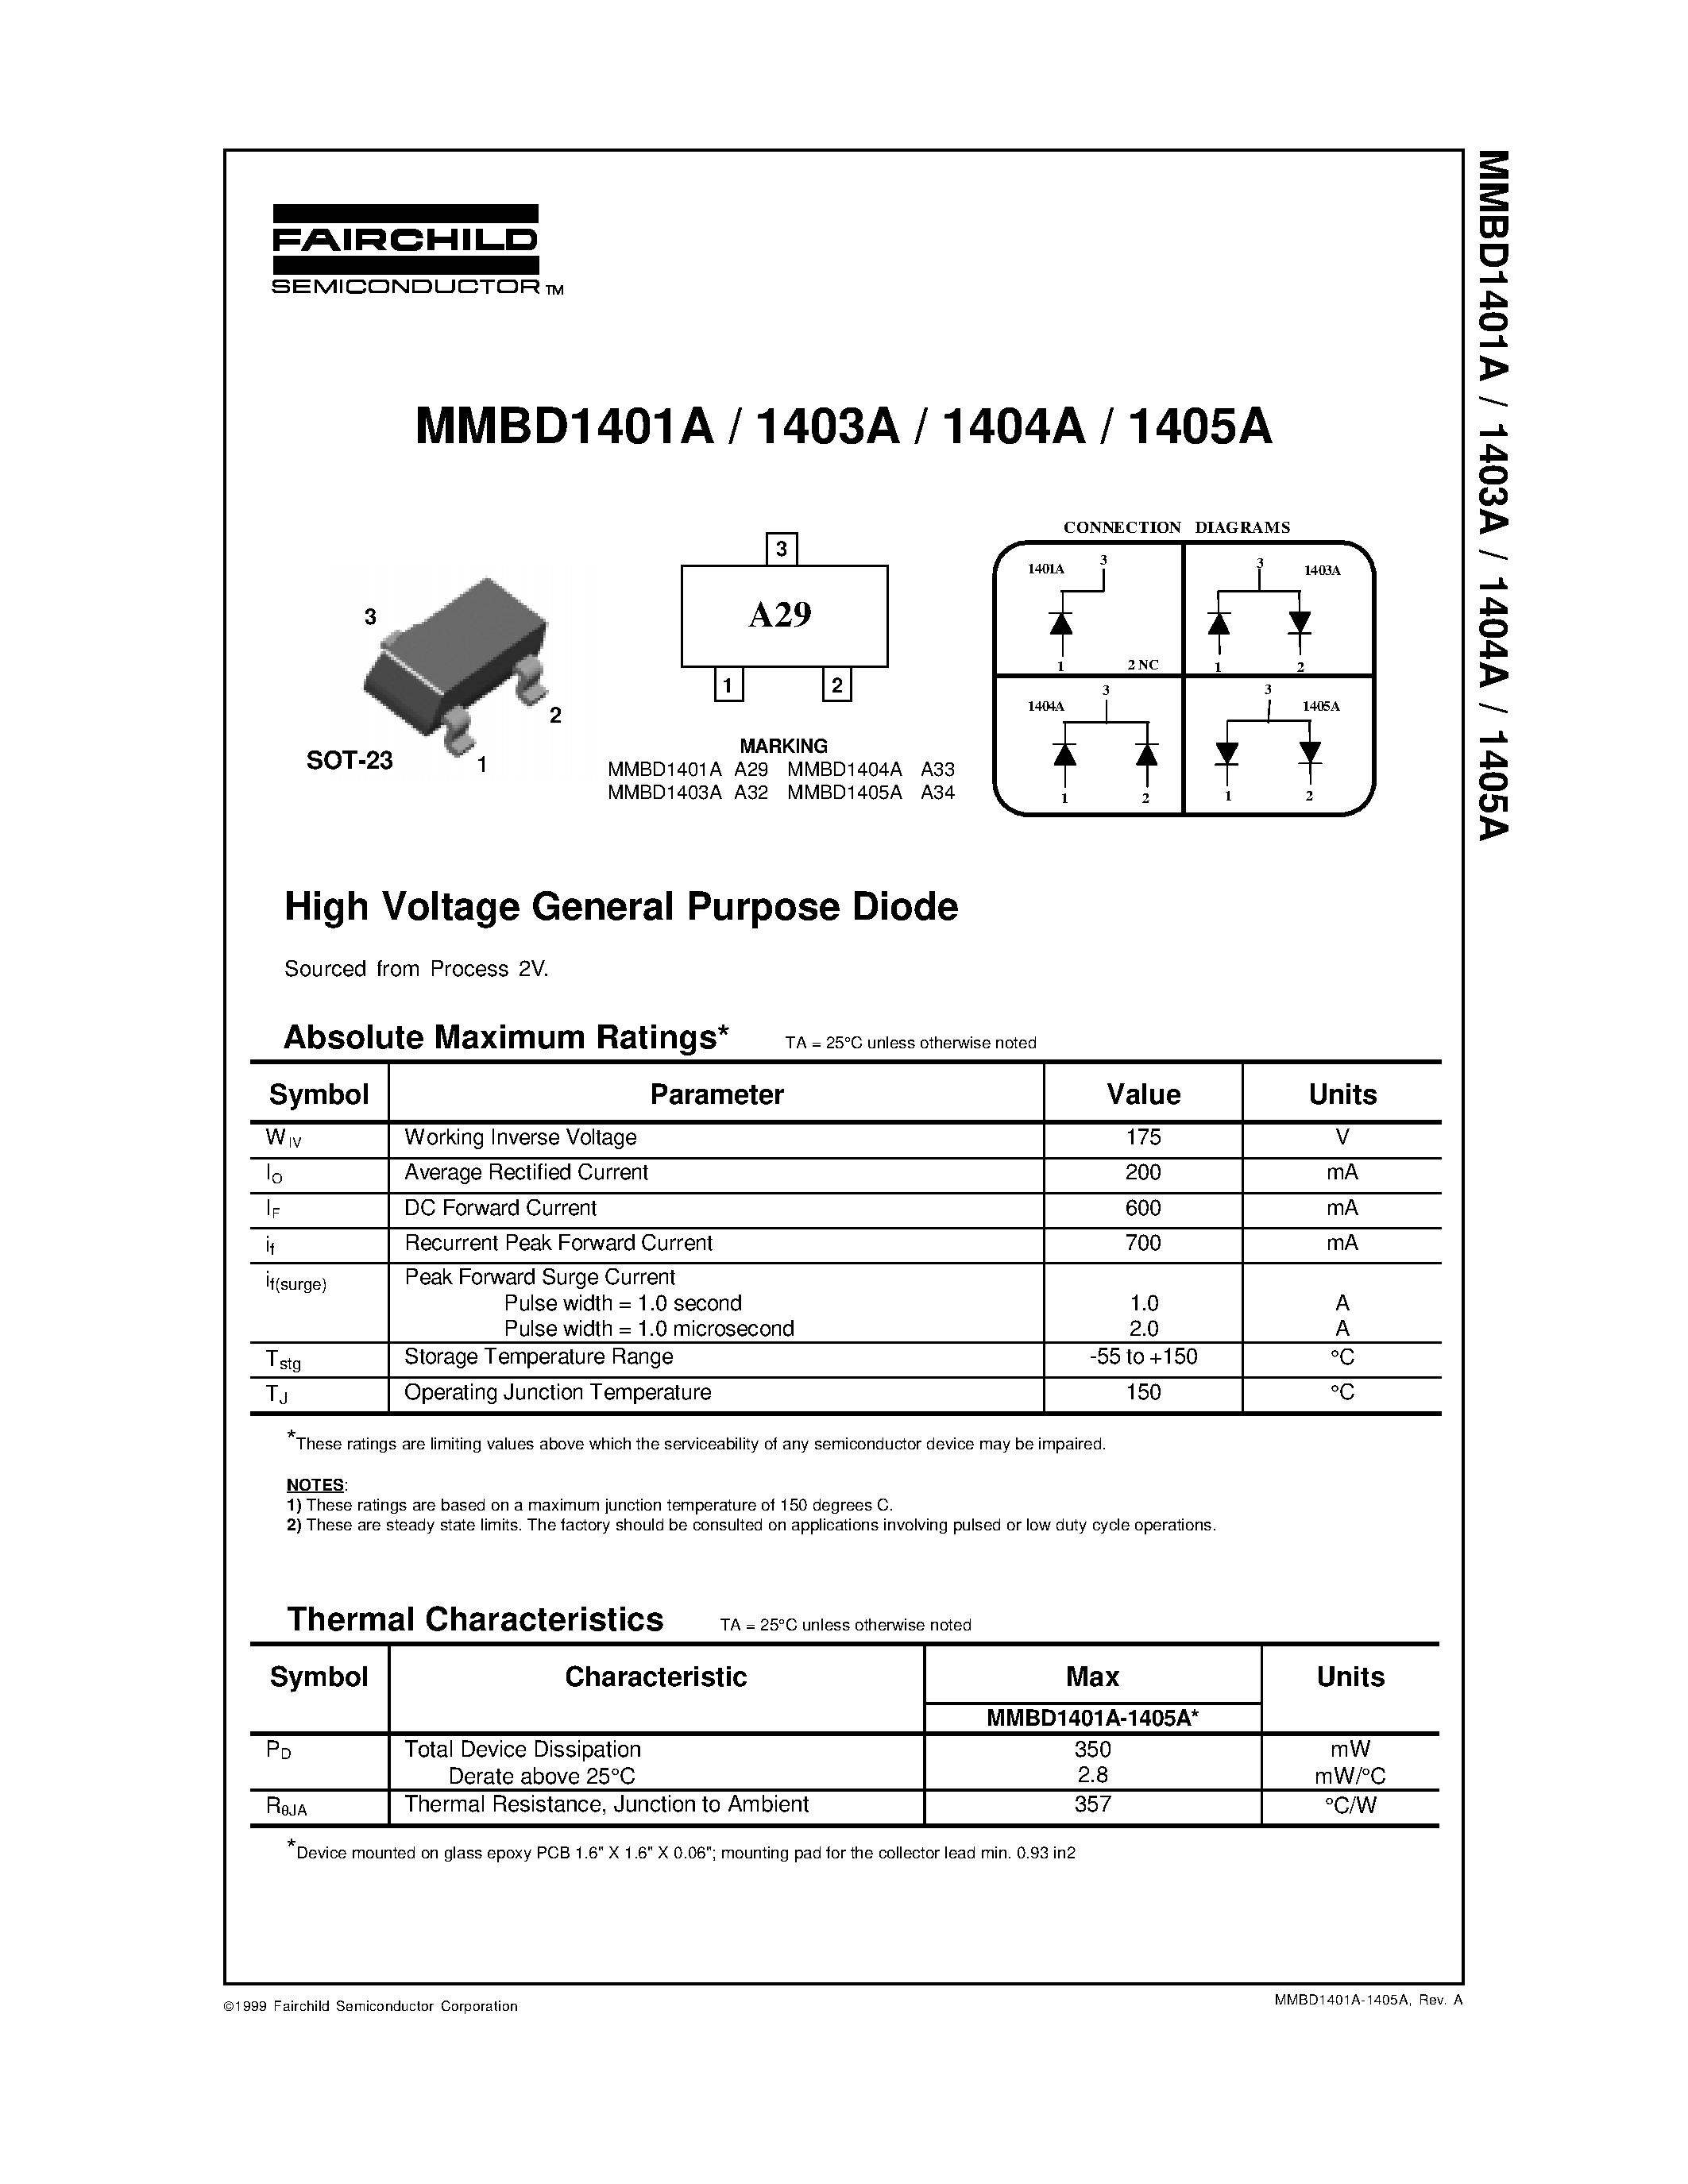 Даташит MMBD1404A - High Voltage General Purpose Diode страница 1